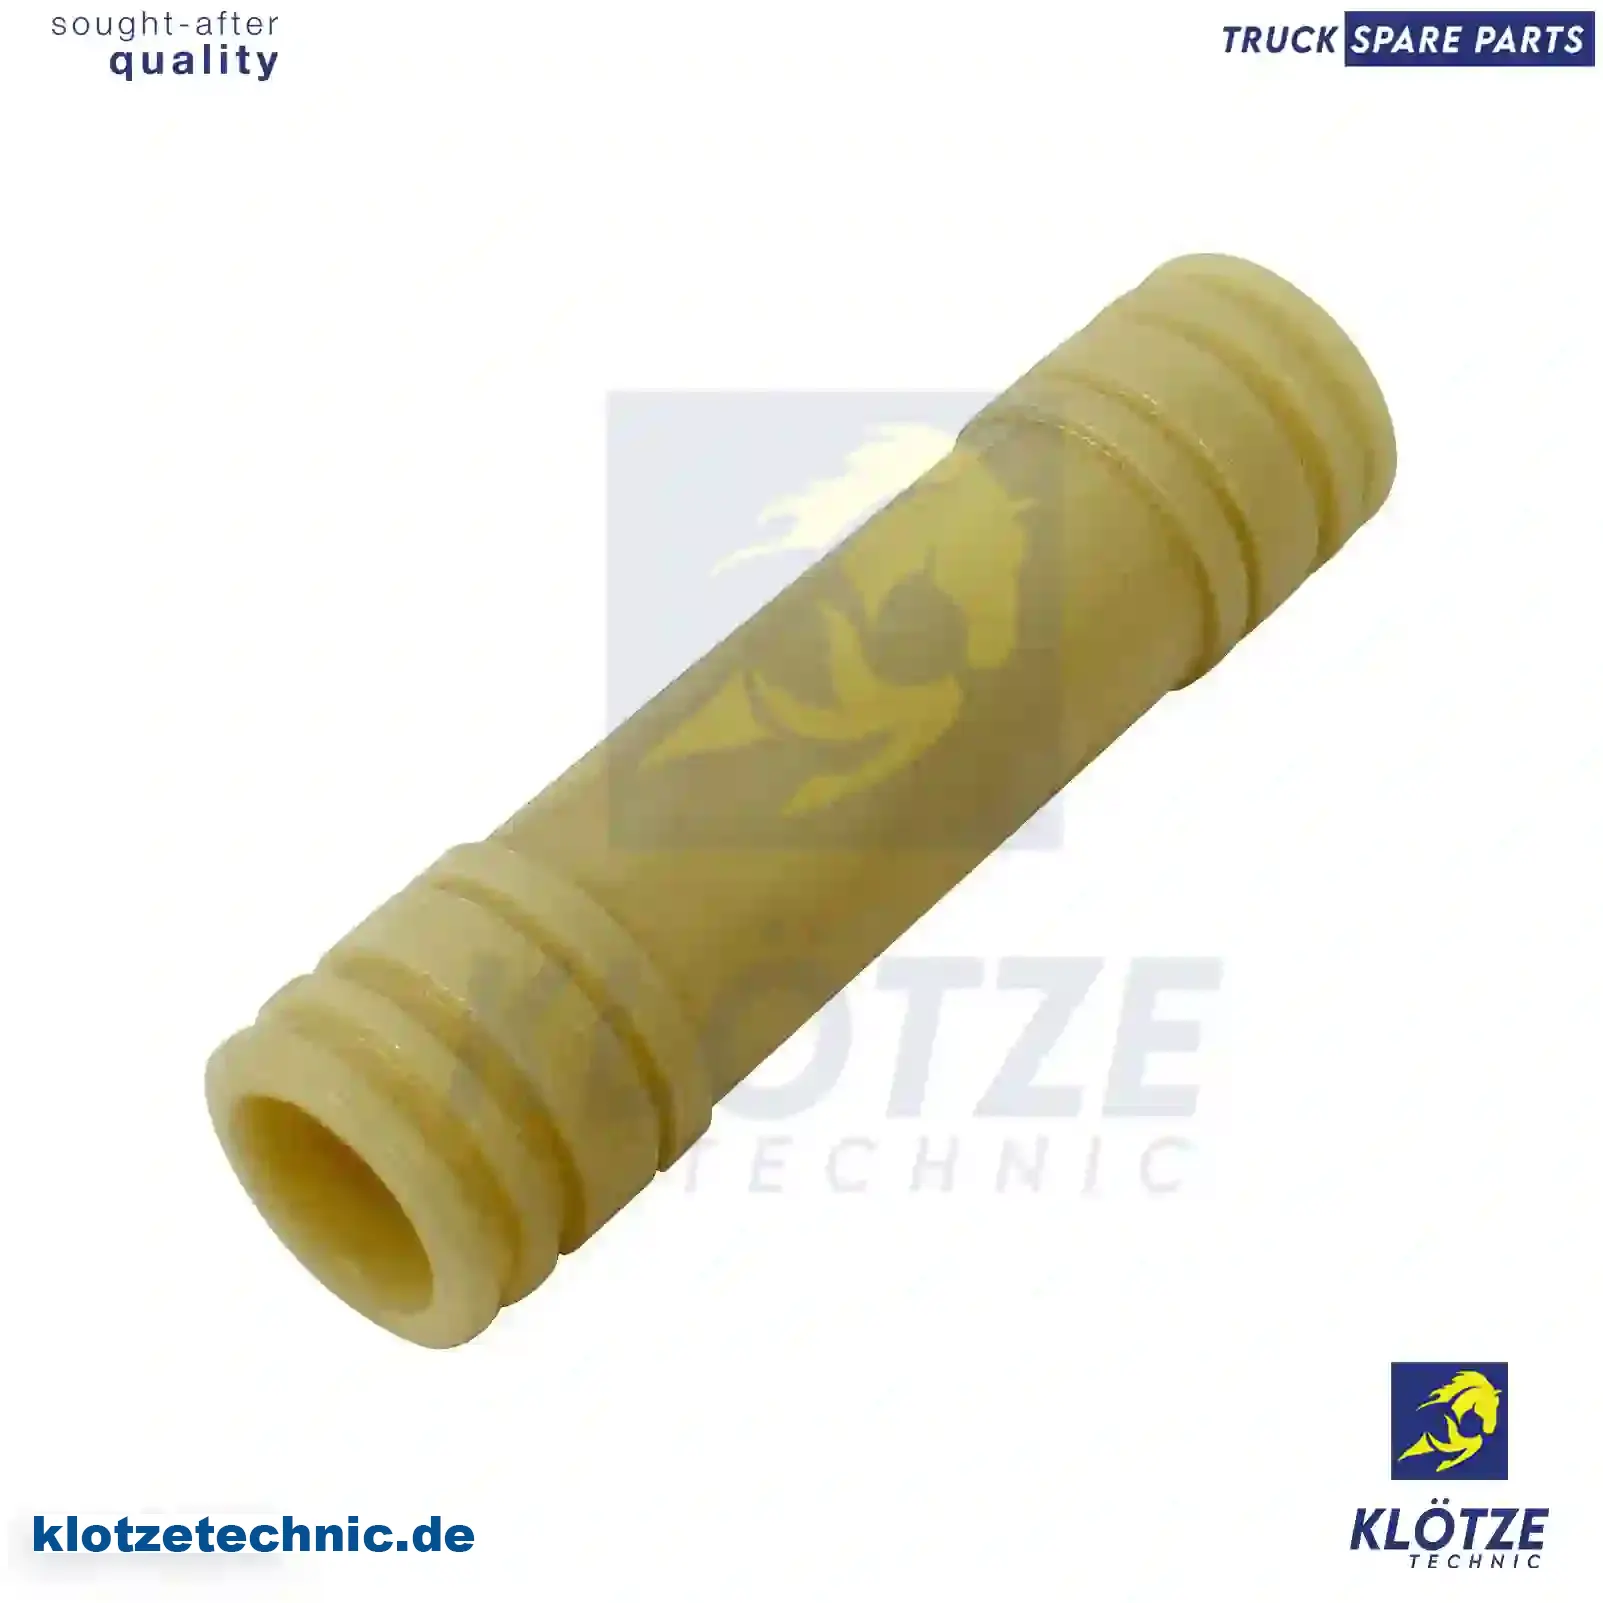 Cooling water pipe, 99443808 || Klötze Technic